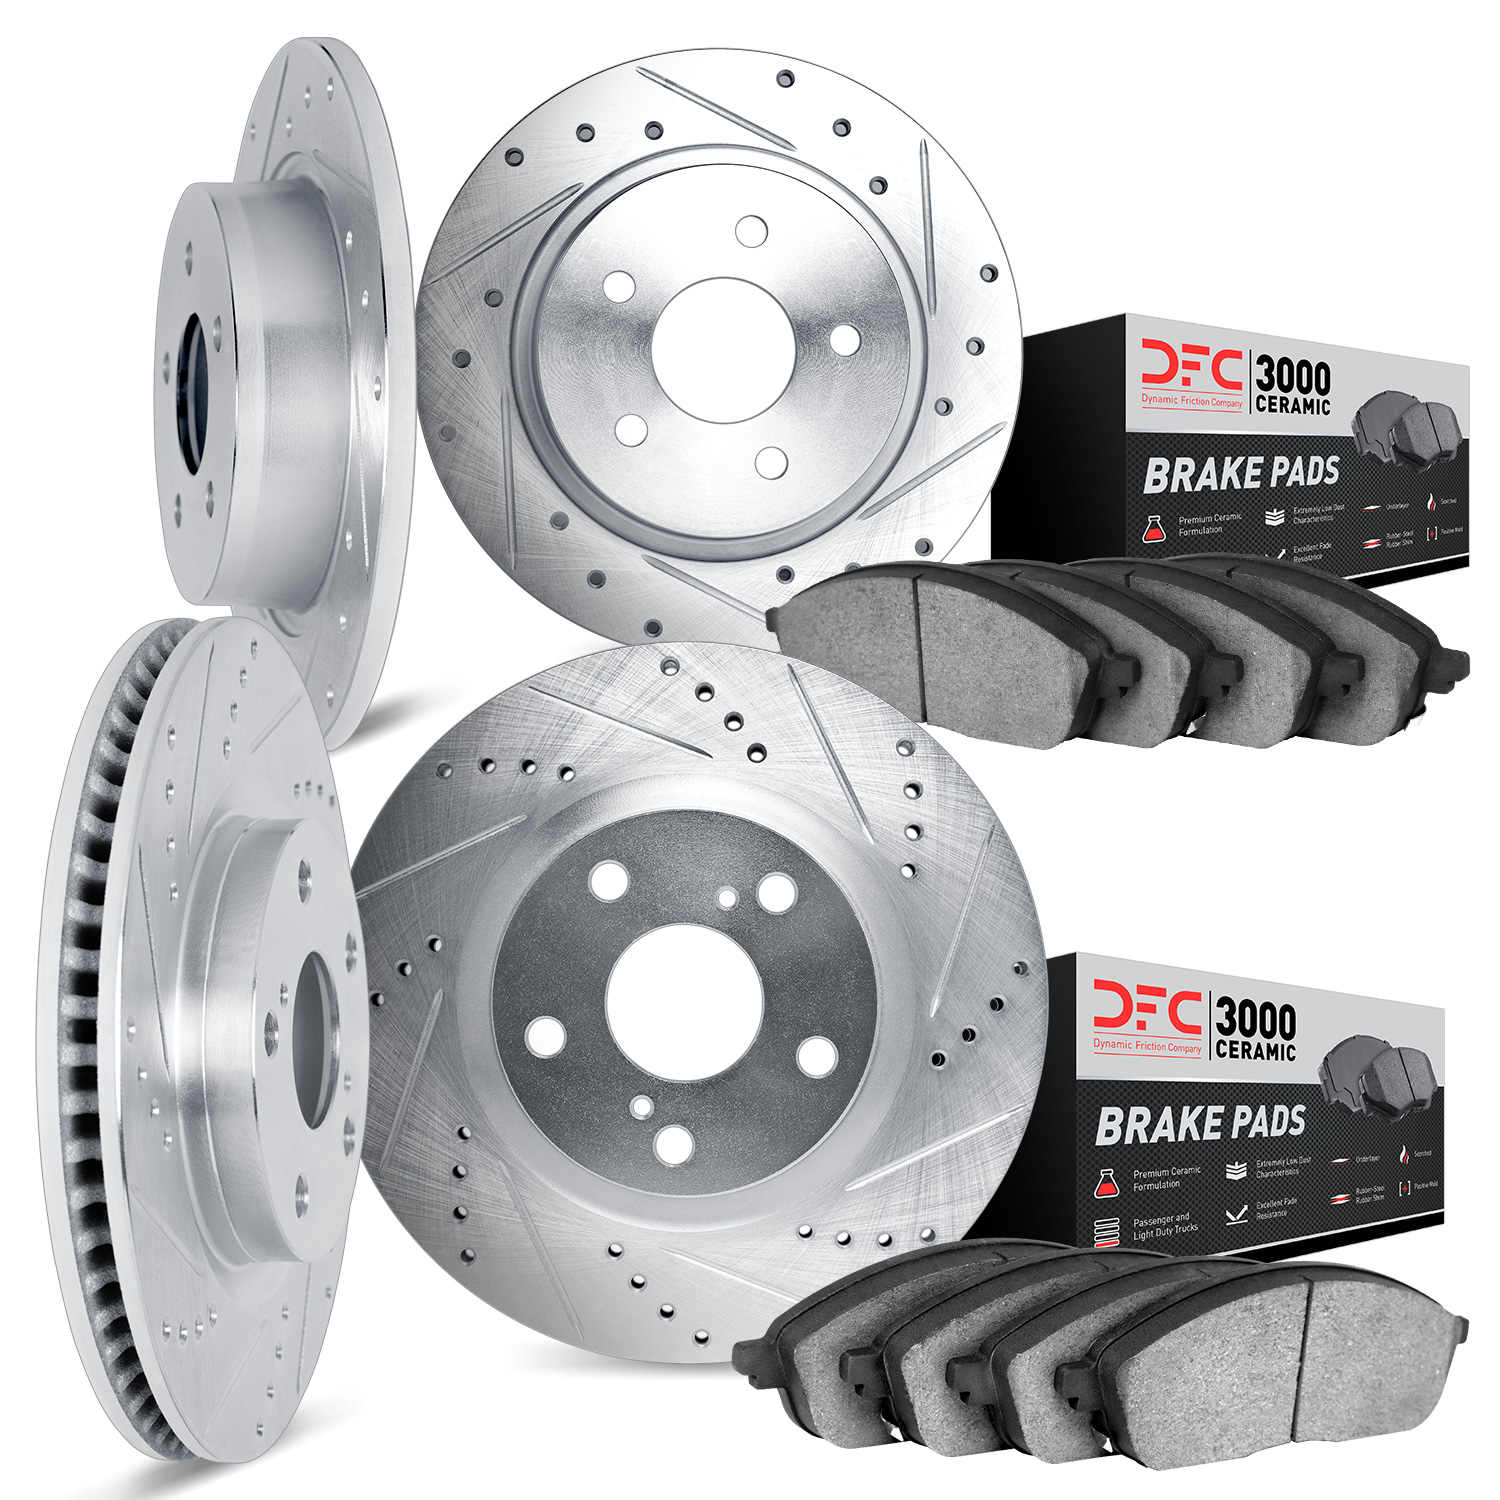 7304-54112 Drilled/Slotted Brake Rotor with 3000-Series Ceramic Brake Pads Kit [Silver], 2013-2014 Ford/Lincoln/Mercury/Mazda, P